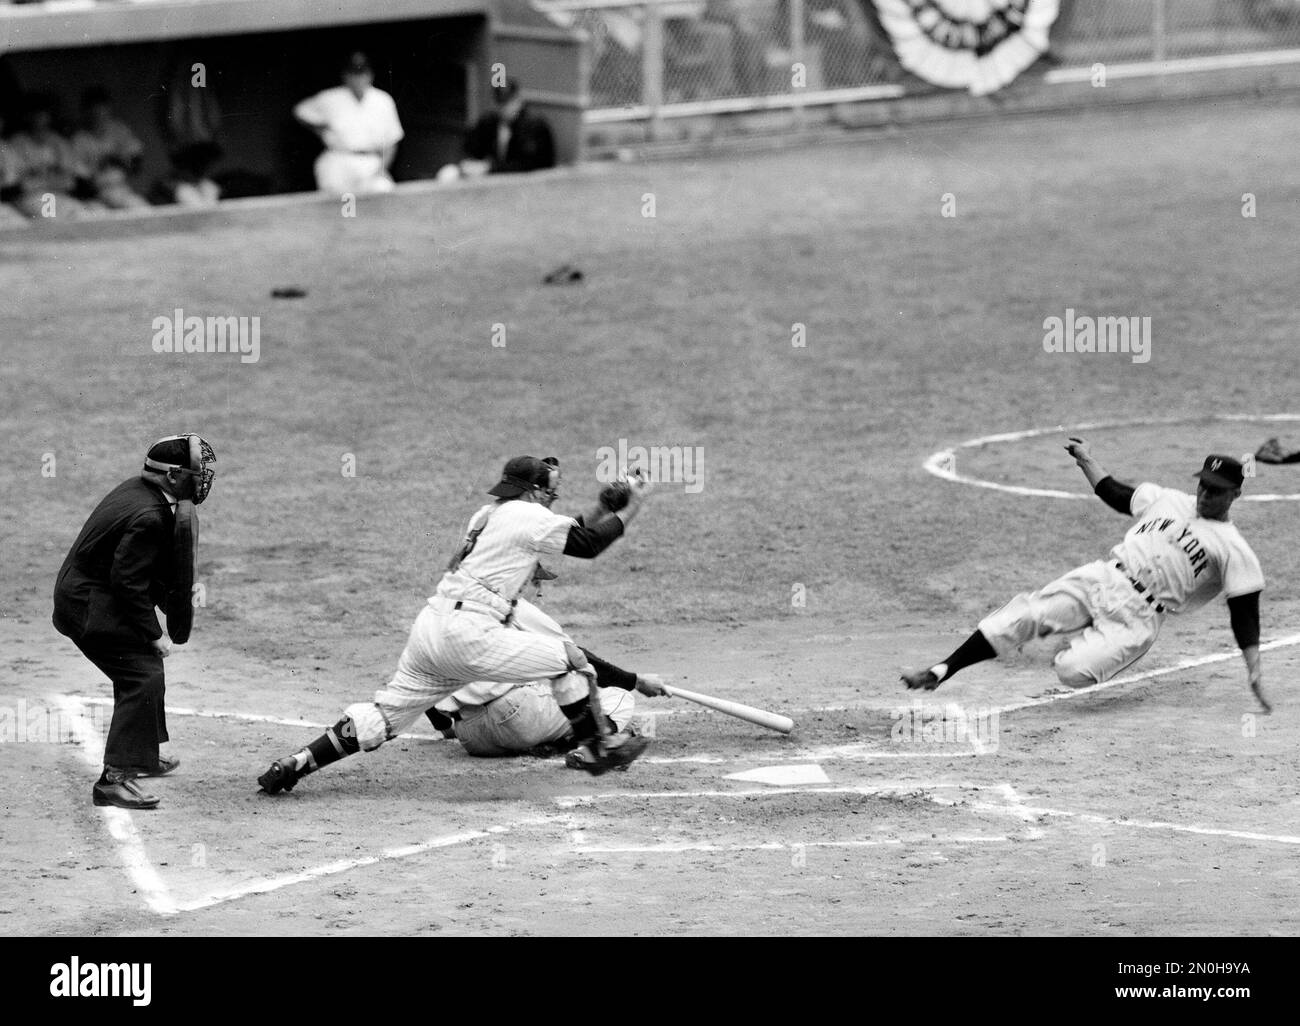 https://c8.alamy.com/comp/2N0H9YA/file-in-this-oct-4-1951-file-photo-new-york-giants-monte-irvin-right-successfully-steals-home-as-new-york-yankees-catcher-yogi-berra-steps-up-to-the-plate-with-the-ball-in-the-first-inning-of-game-1-in-baseballs-world-series-at-yankee-stadium-in-new-york-irvin-a-hall-of-fame-power-hitting-outfielder-who-starred-for-the-new-york-giants-in-the-1950s-in-a-career-abbreviated-by-major-league-baseballs-exclusion-of-black-players-died-monday-night-jan-11-2016-of-natural-causes-at-his-houston-home-he-was-96-ap-photofile-2N0H9YA.jpg